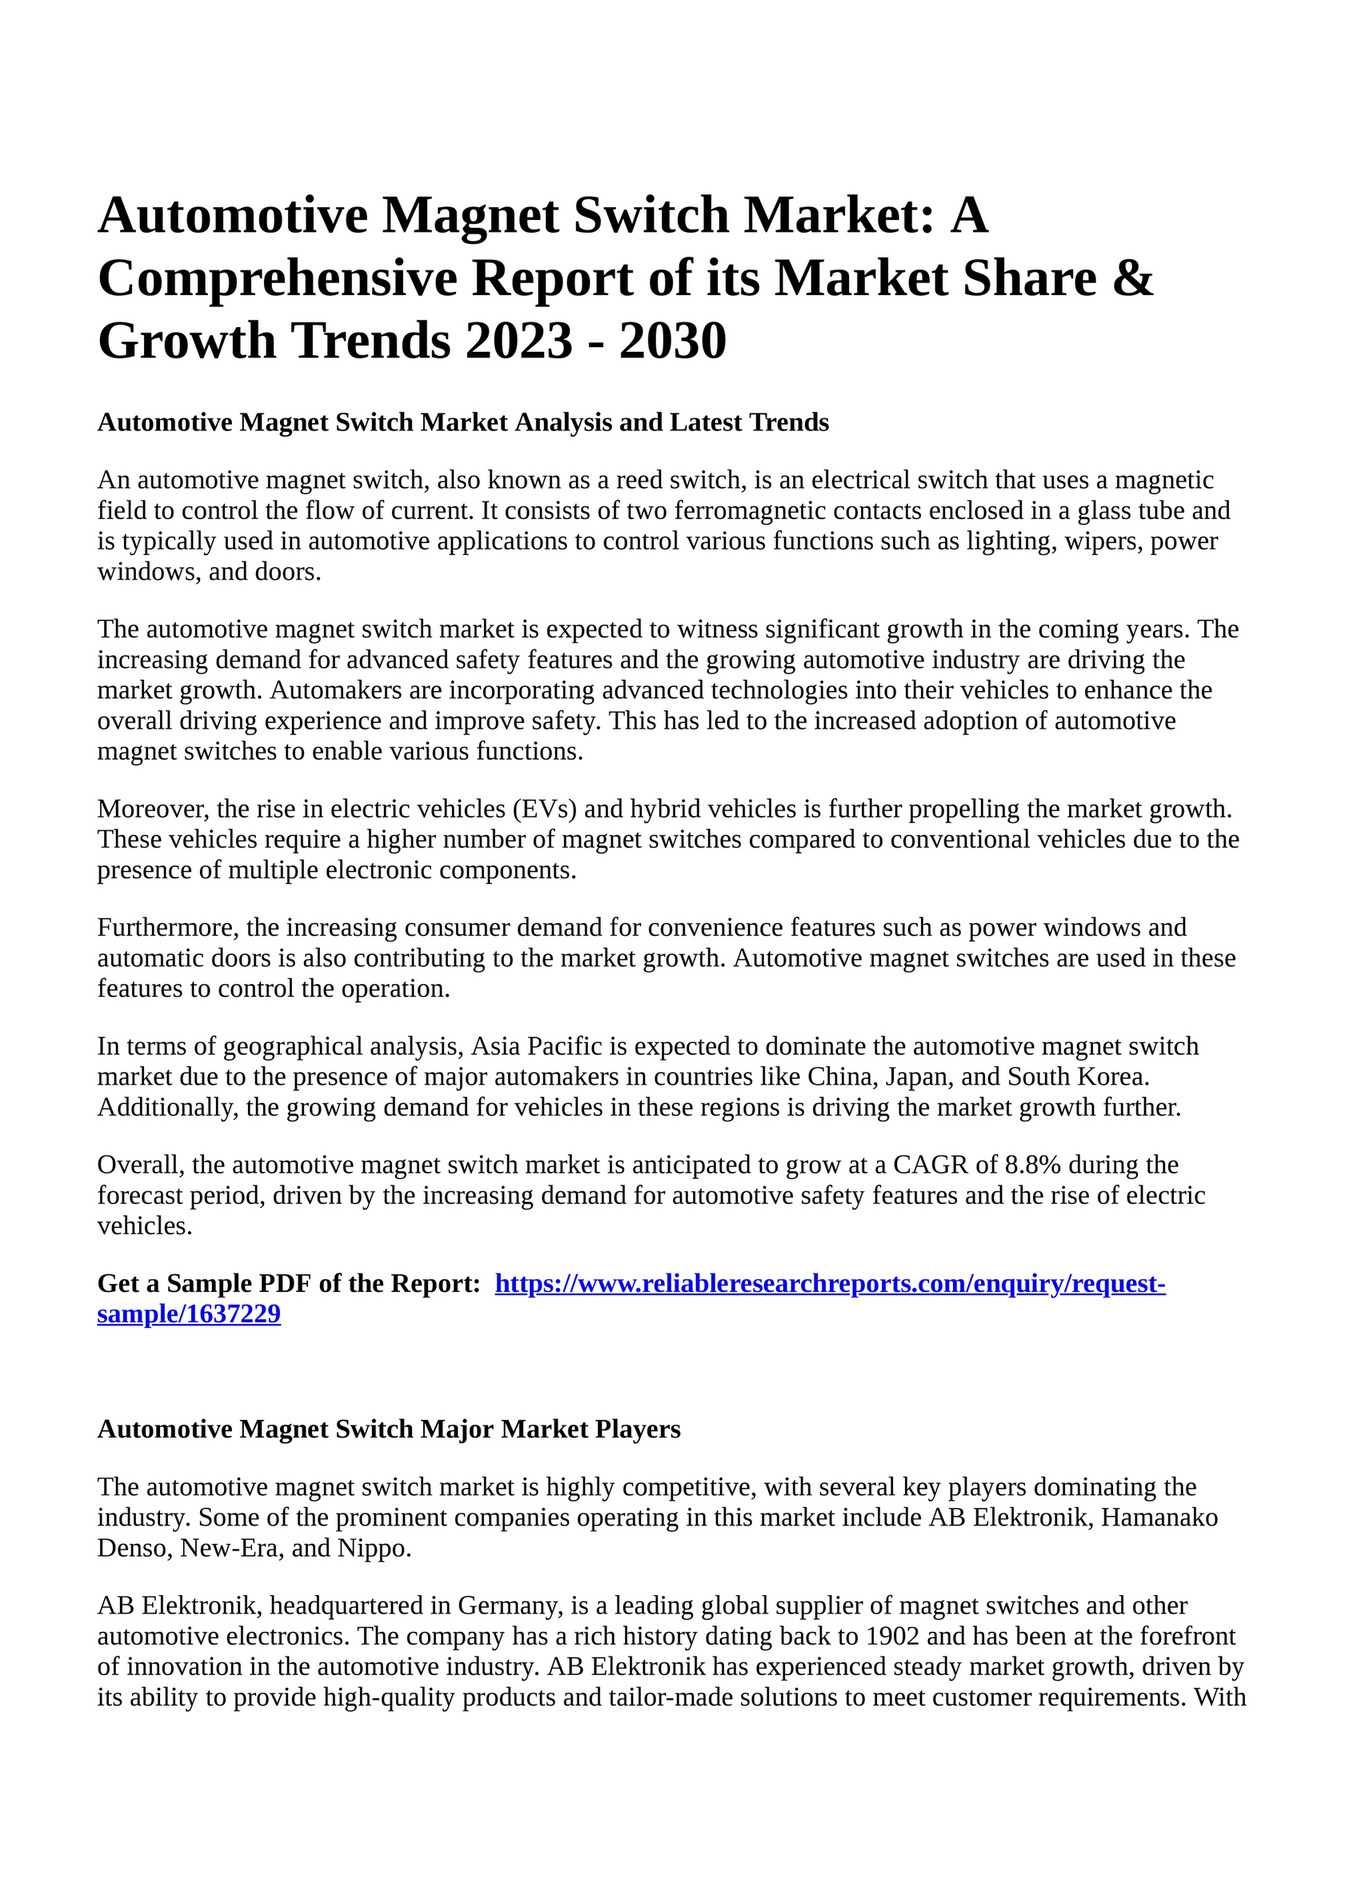 Reportprime - Automotive Magnet Switch Market: A Comprehensive Report of  its Market Share & Growth Trends 2023 - 2030 - Page 1